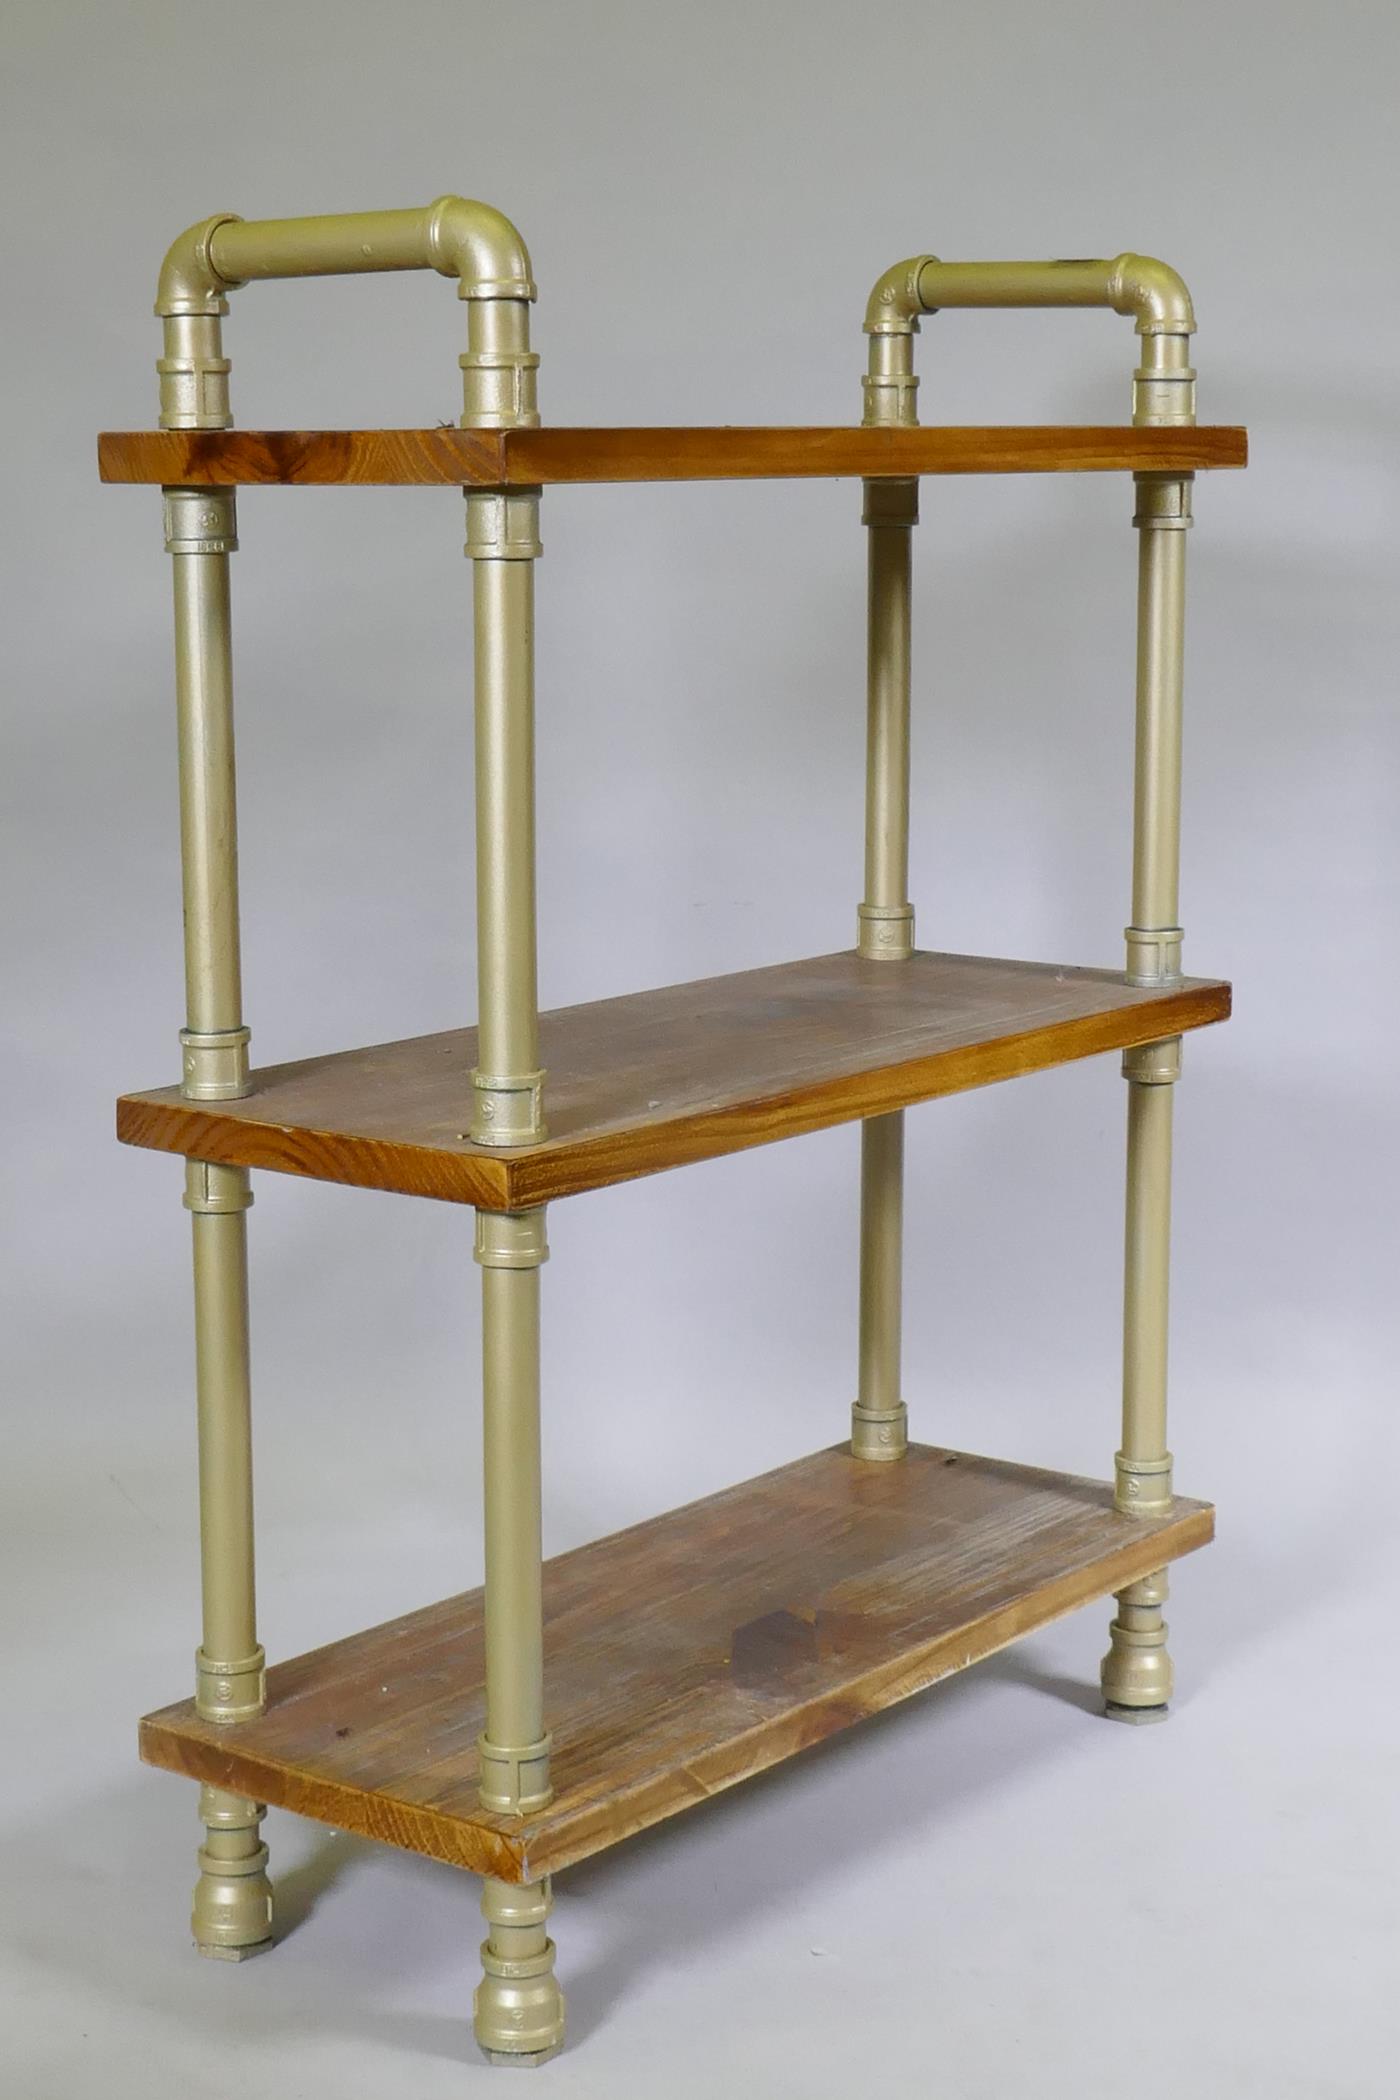 An industrial style three tier buffet with hardwood shelves united by metal pipe supports, 75 x 30 x